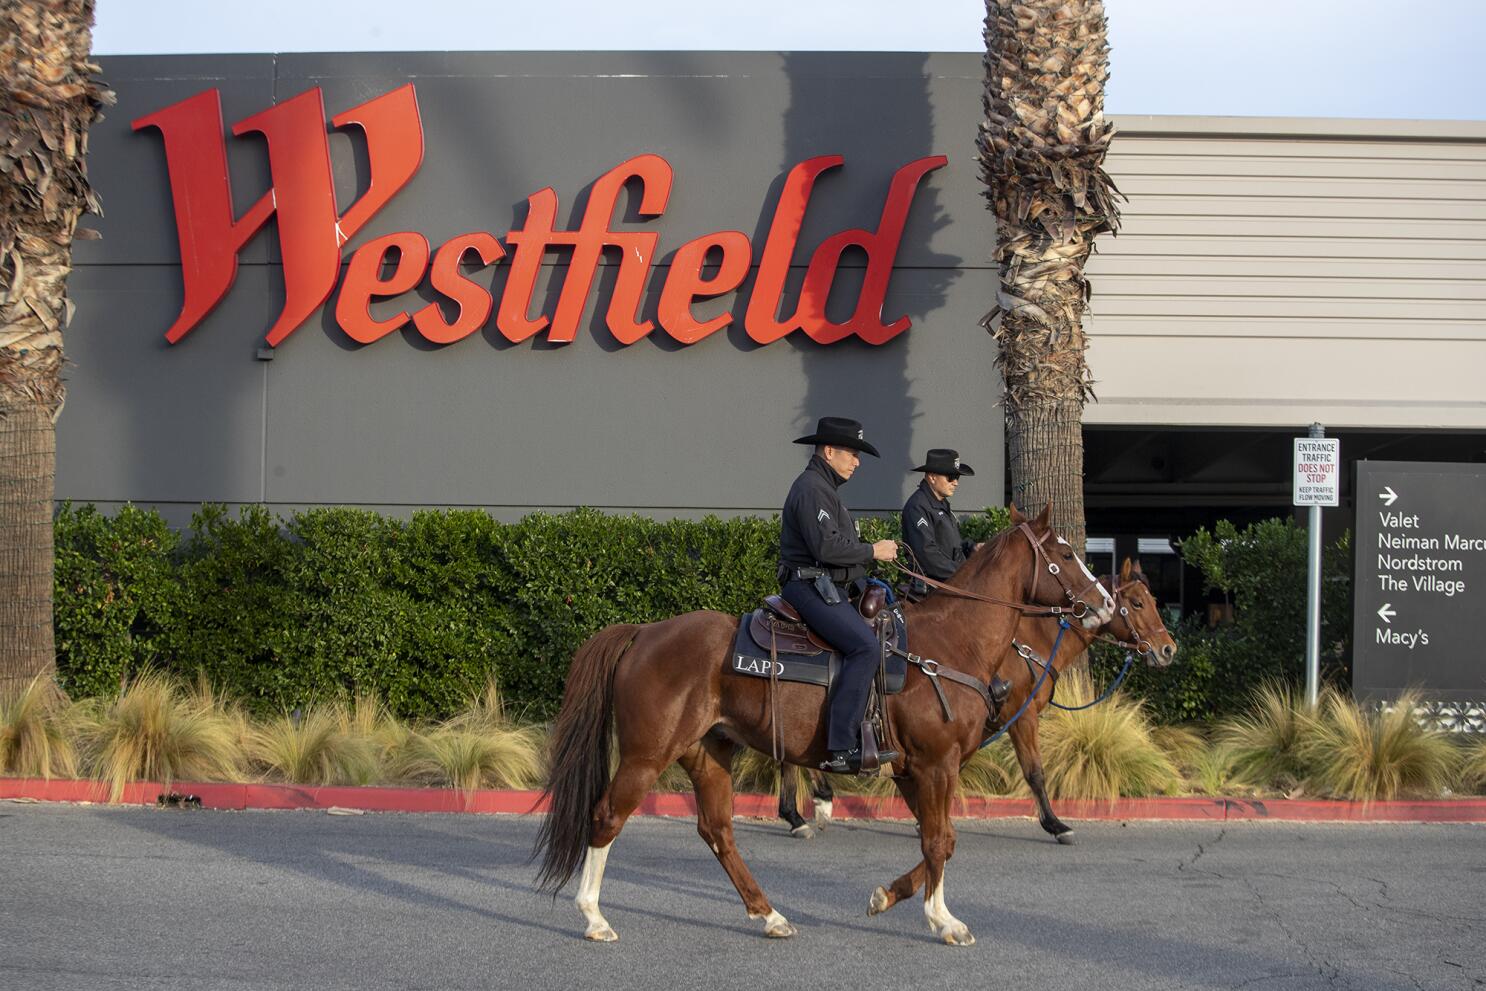 Westfield Topanga shopping center in Southern California - Los Angeles Times